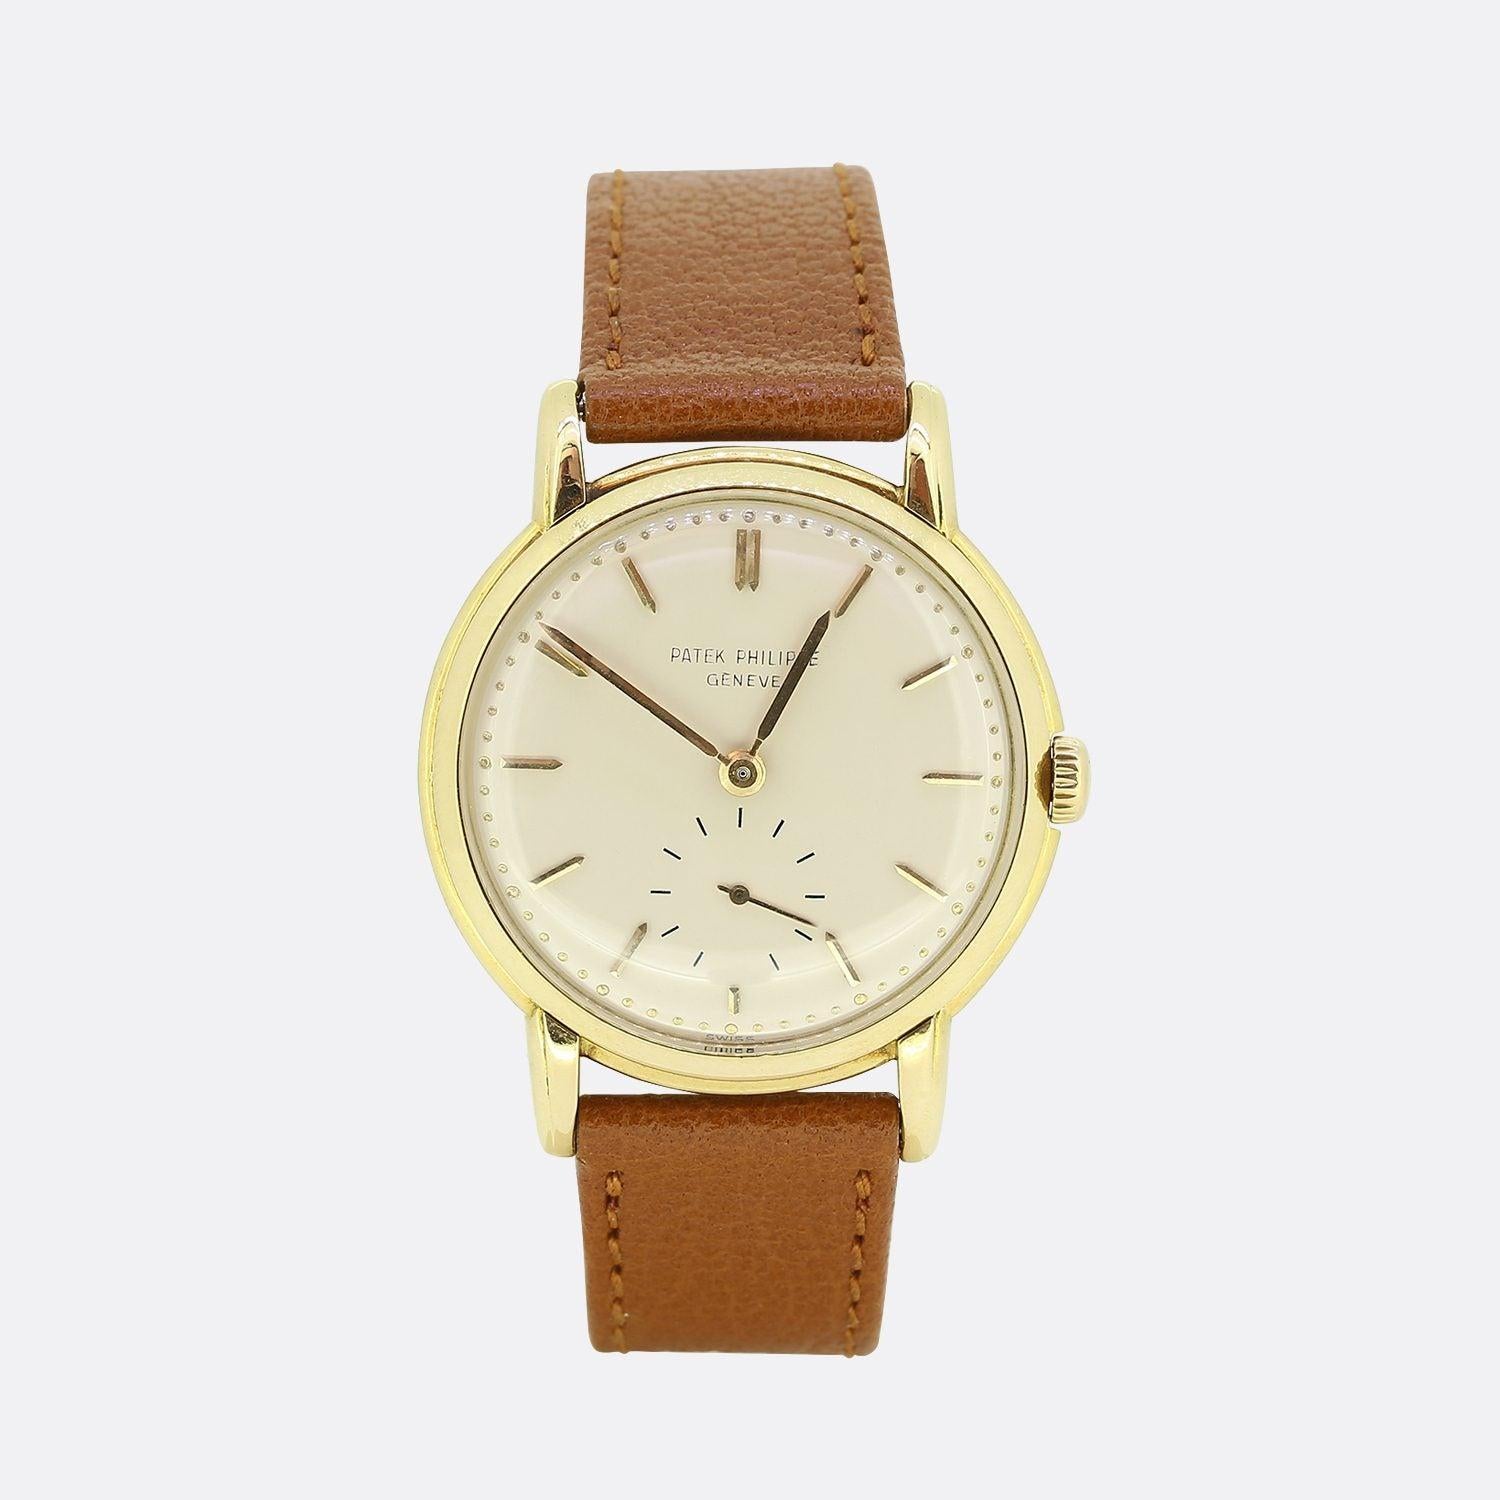 This is a vintage 18ct yellow gold gents Patek Philippe wristwatch. The watch dates back to the mid to late 1950s and features a silver dial with gold hour and minute hands and a small seconds hand at 6 oclock. This case is 18ct yellow gold and has